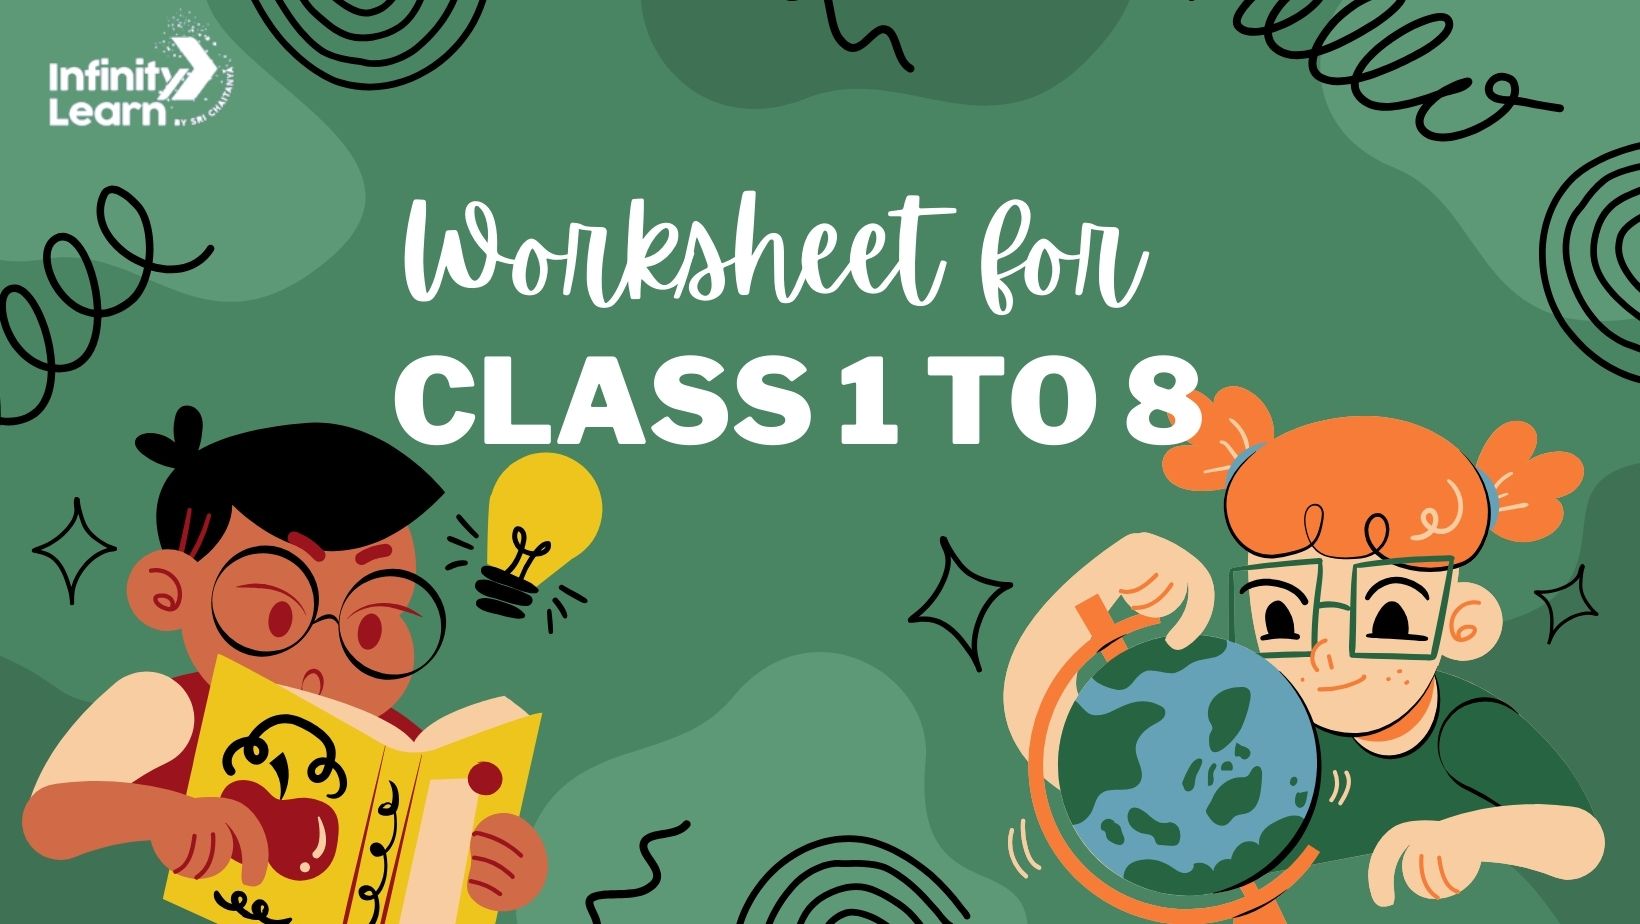 Worksheet for Class 1 to 8